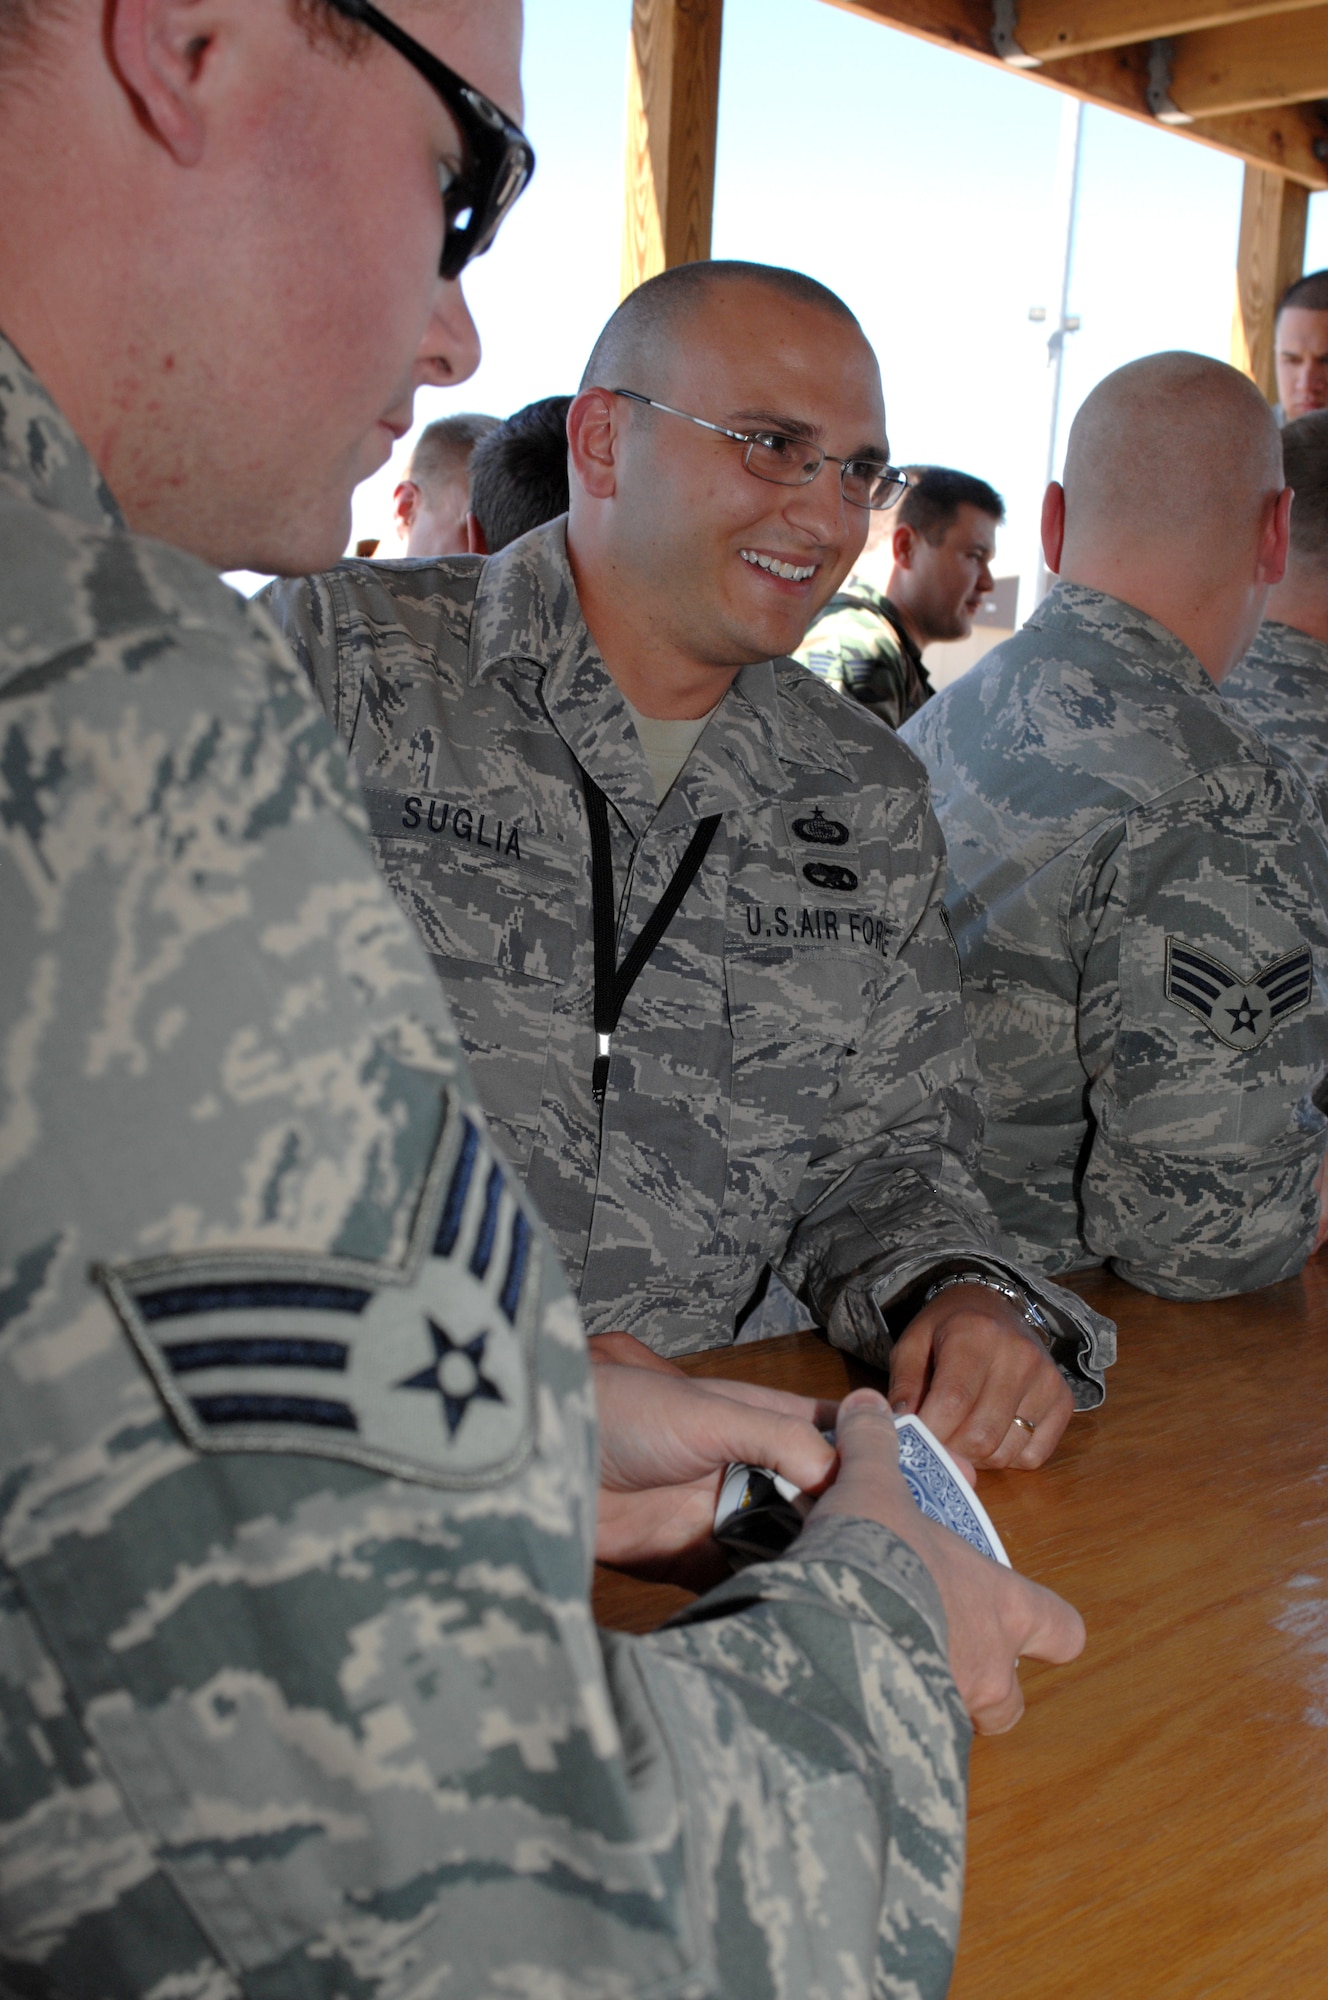 Tech. Sgt. Michael Suglia, 49th Operations Support Squadron, smiles while playing cards during the Air Force birthday celebration outside the 7th Fighter Squadron at Holloman Air Force Base, N.M., September 16. The squadron held a small celebration with snacks, drinks and birthday cake in celebration of the Air Force?s birthday which is officially September 18, 1947. (U.S. Air Force photo/Airman Sondra M. Escutia)